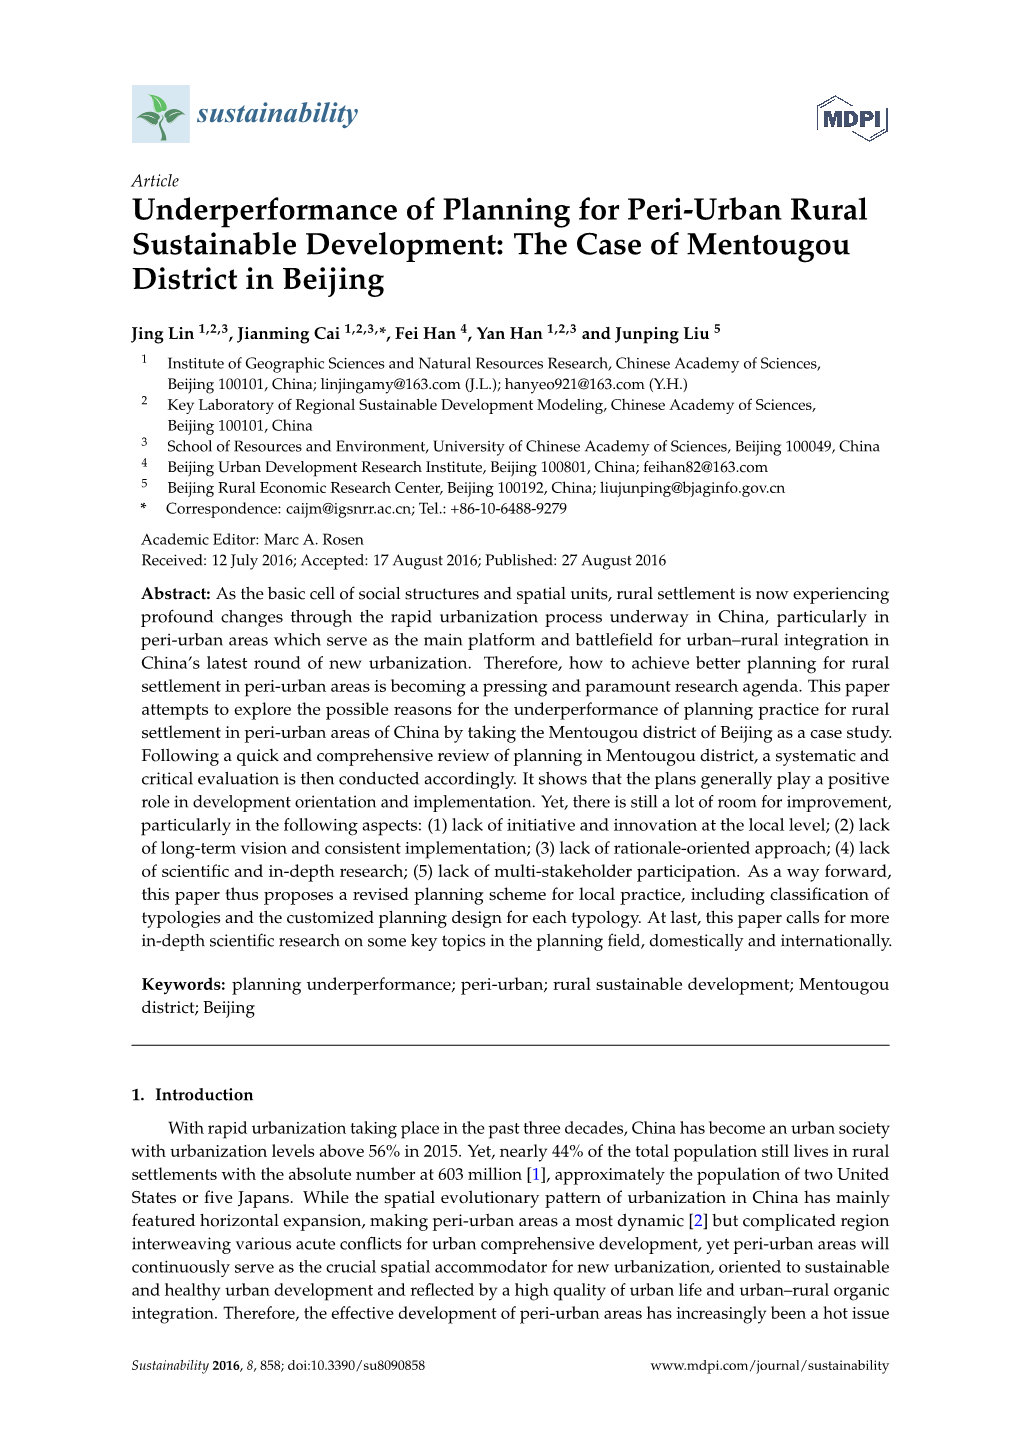 Underperformance of Planning for Peri-Urban Rural Sustainable Development: the Case of Mentougou District in Beijing